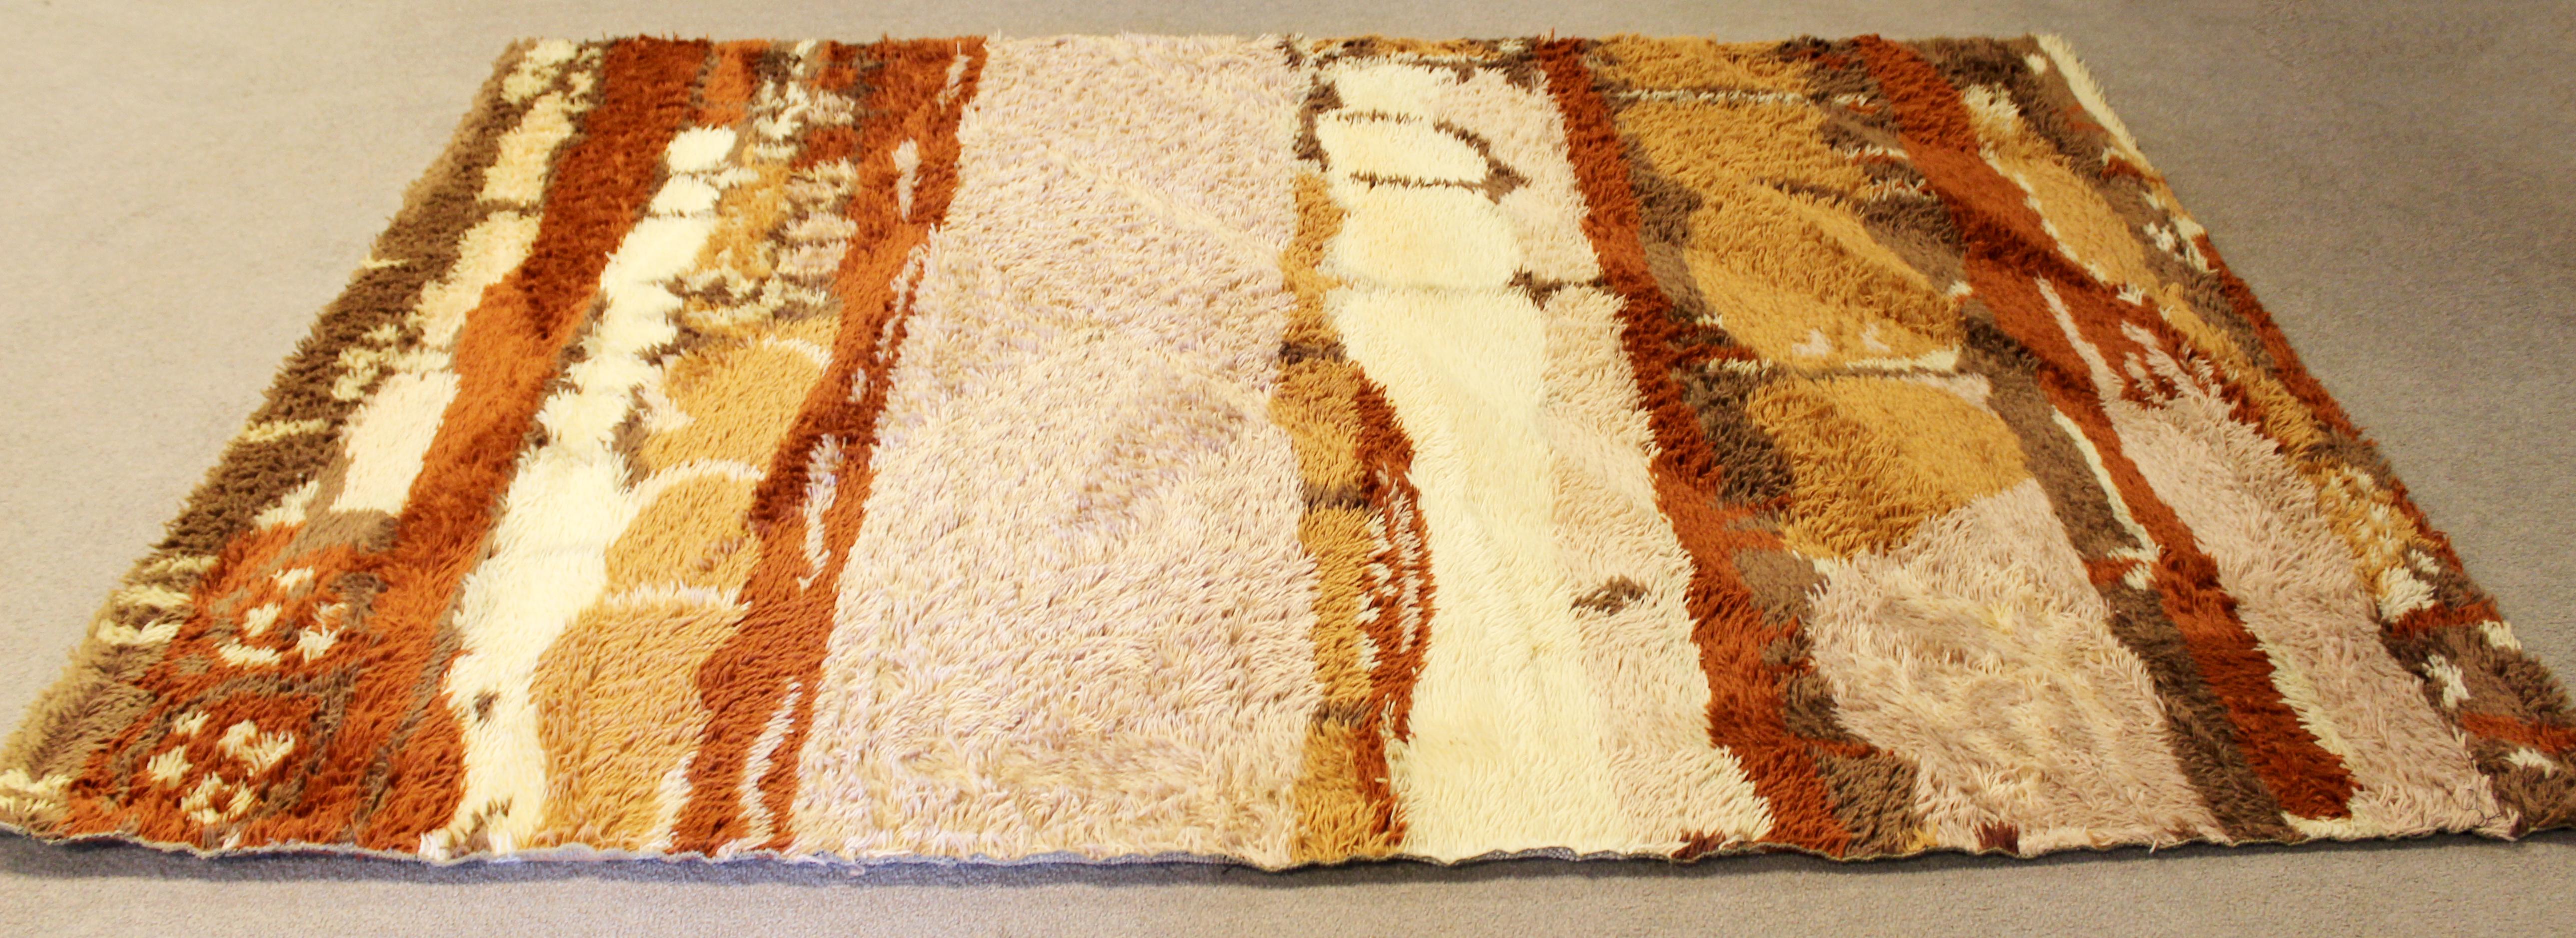 For your consideration is a gorgeous, Danish, rectangular Rya area rug or carpet, with a rust, brown and cream pattern, circa the 1960s. In very good vintage condition. The dimensions are 72